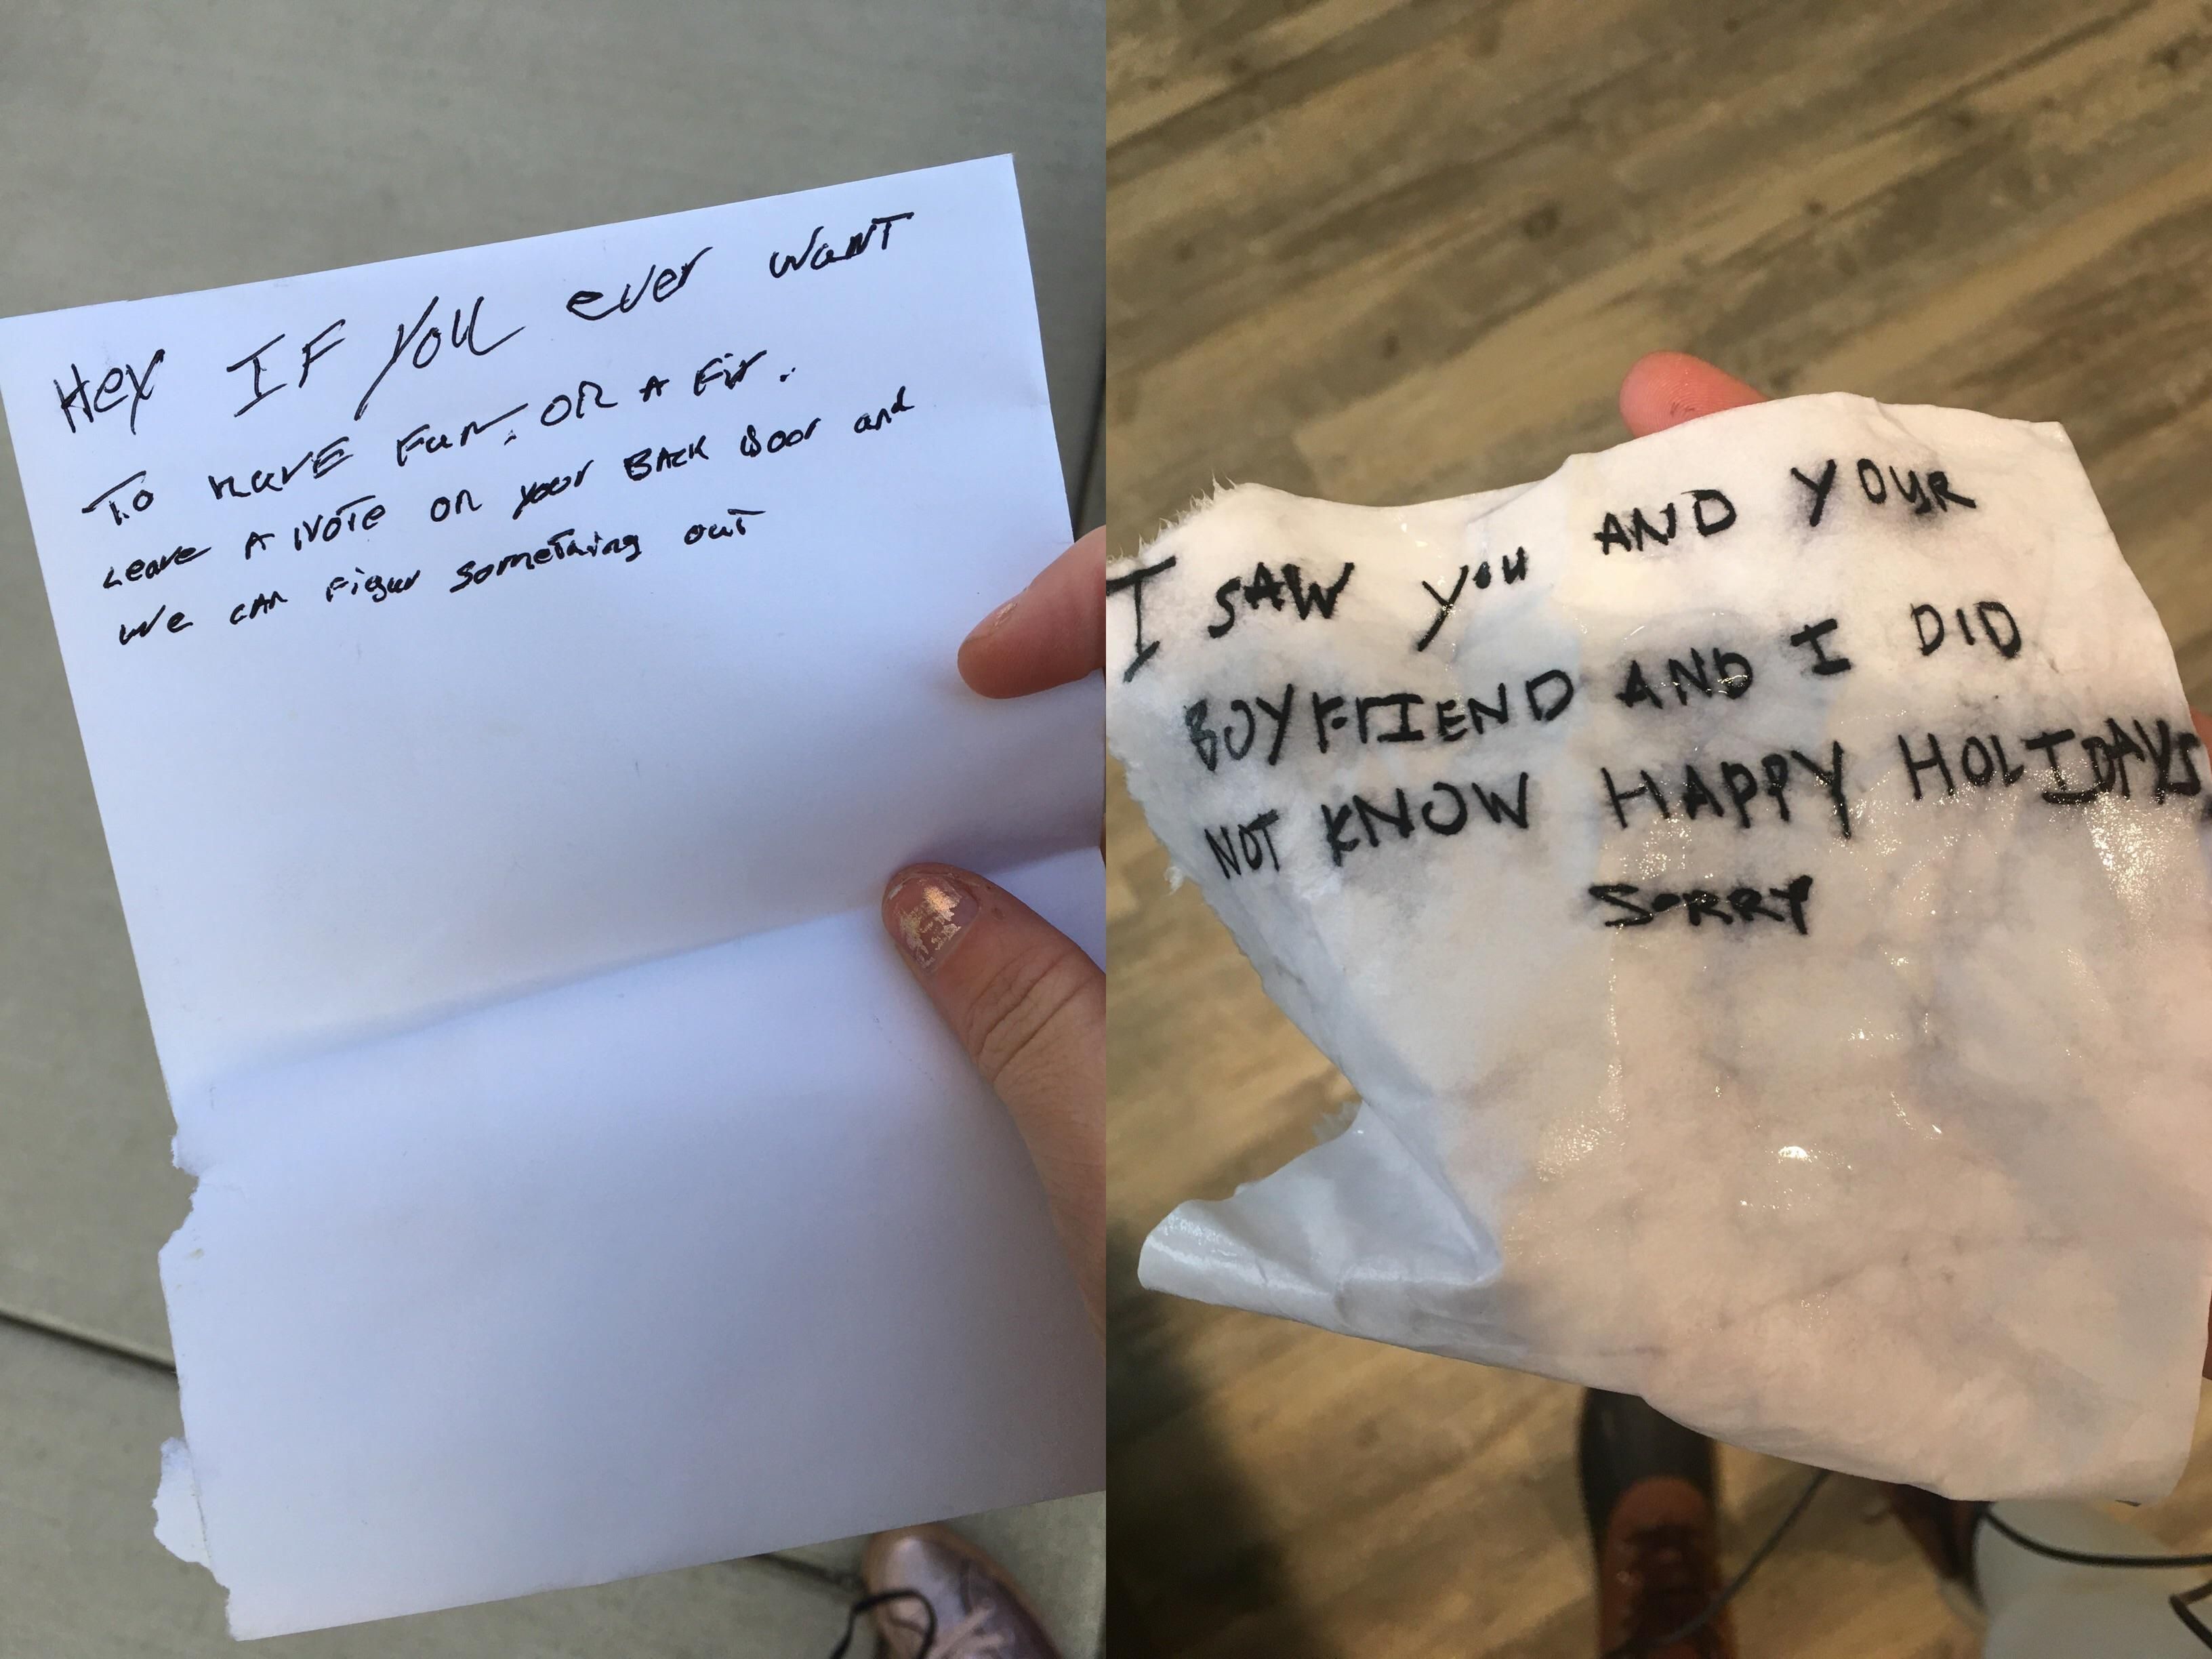 I live alone and someone put the first note on my car, and it freaked me out. The guy I’m dating stayed the night and I just came home to this. Nicest stalker ever